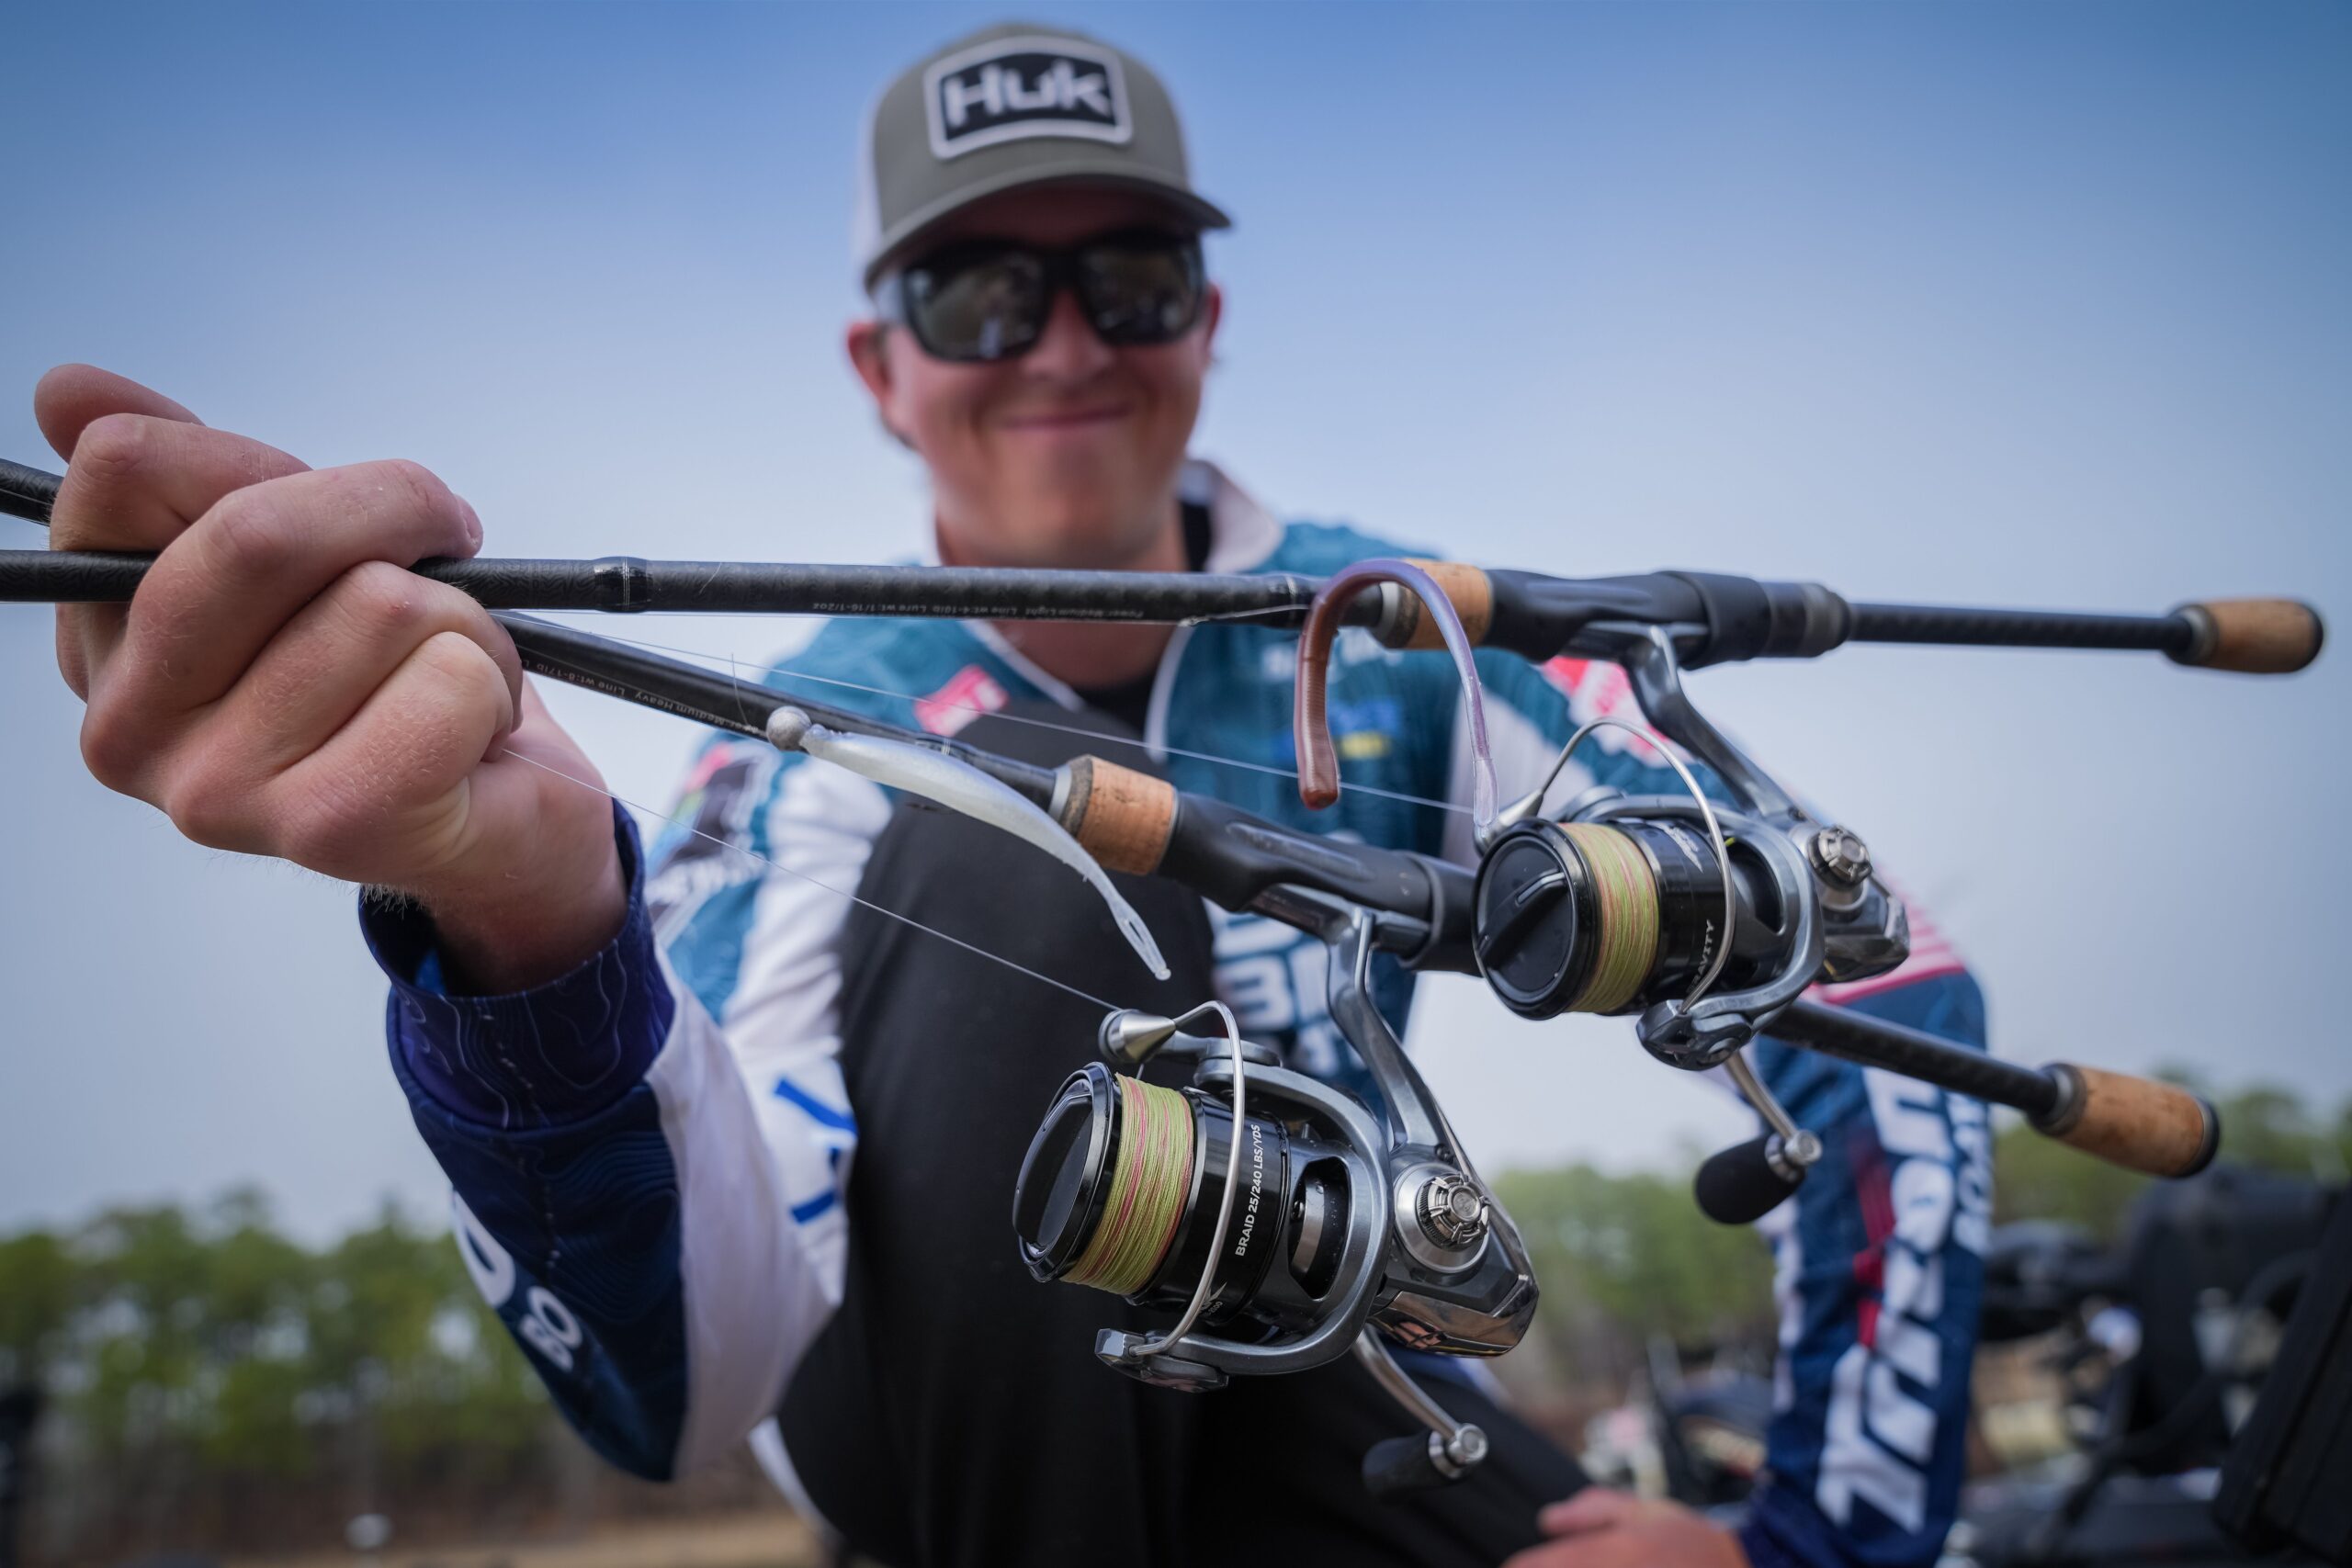 Jig Fishing Techniques Every Angler Should Know – Huk Gear